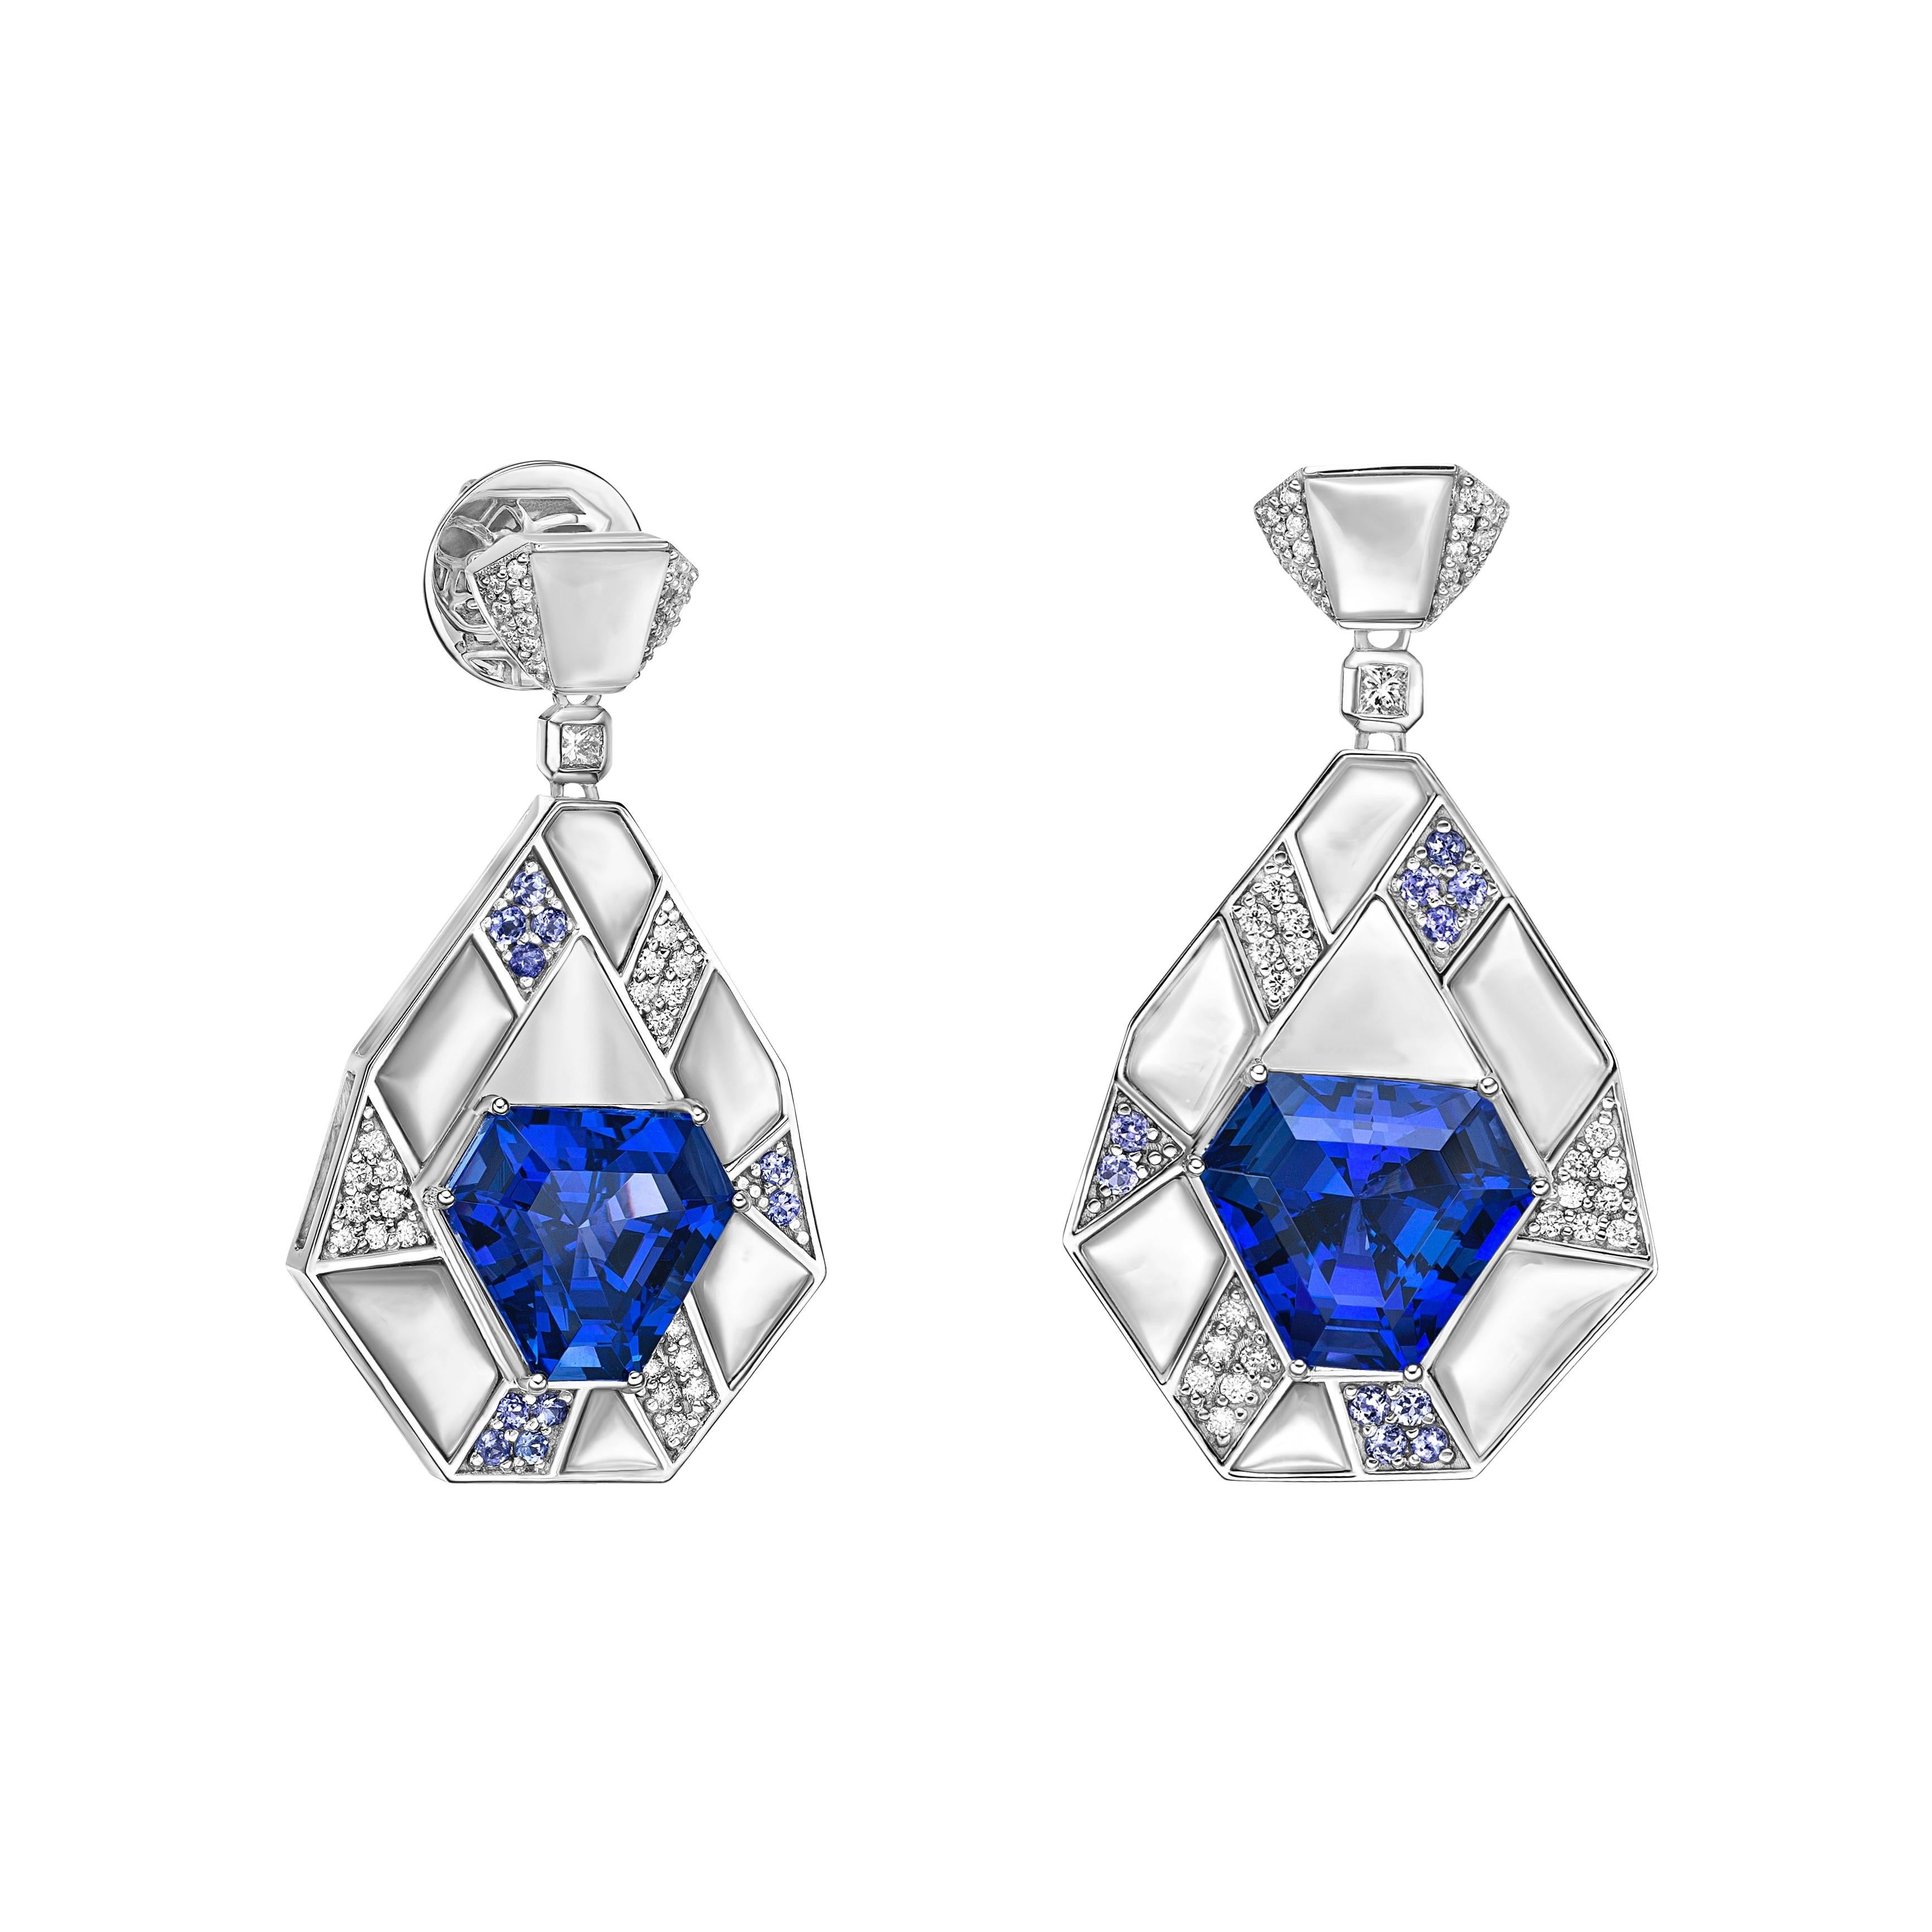 This Tanzanite Jewellery line has high quality beautifully cut Tanzanites. These velvety blue stones are set against an art deco-inspired frame of diamond baguettes.
  
Tanzanite Drop Earrings in 18Karat White Gold with Mother of Pearl and White